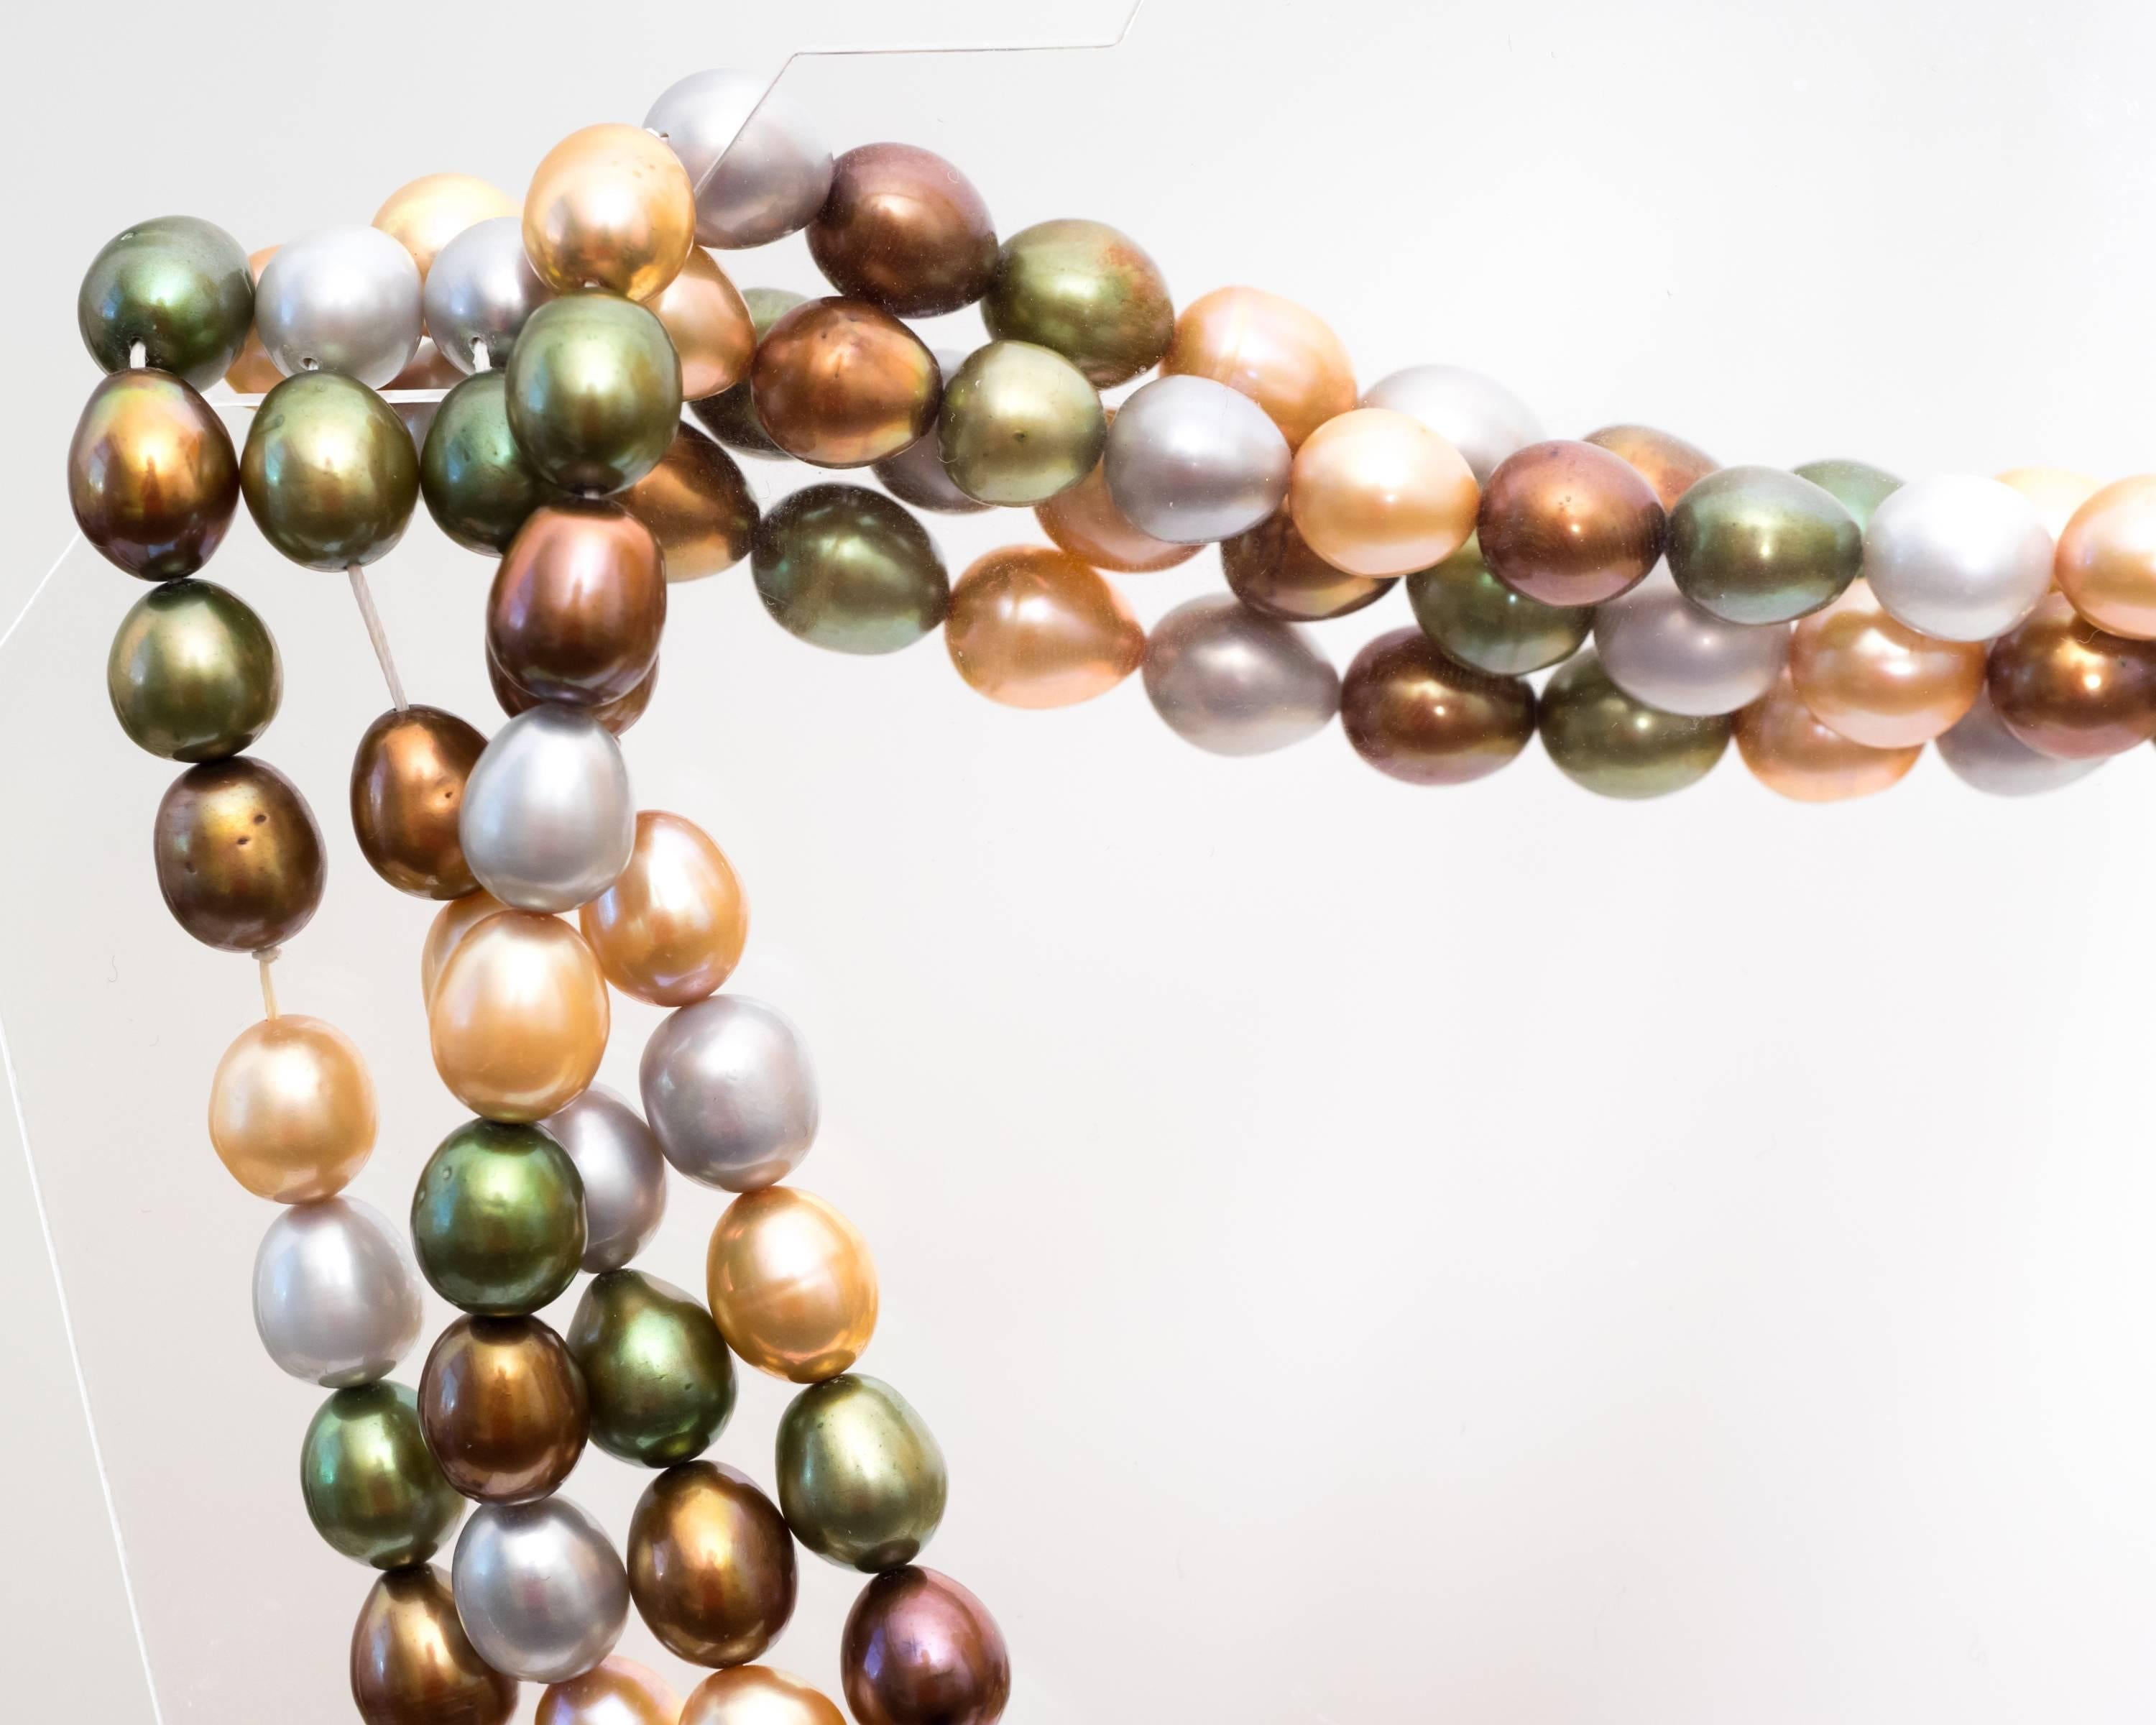 Multicolor Natural South Sea Dyed Pearls
This long seventy two inch strand makes it easy to layer up this necklace. Whether you desire a single long strand, double, or triple layer of lavish pearls. The natural pearls are dyed in olive green, brown,